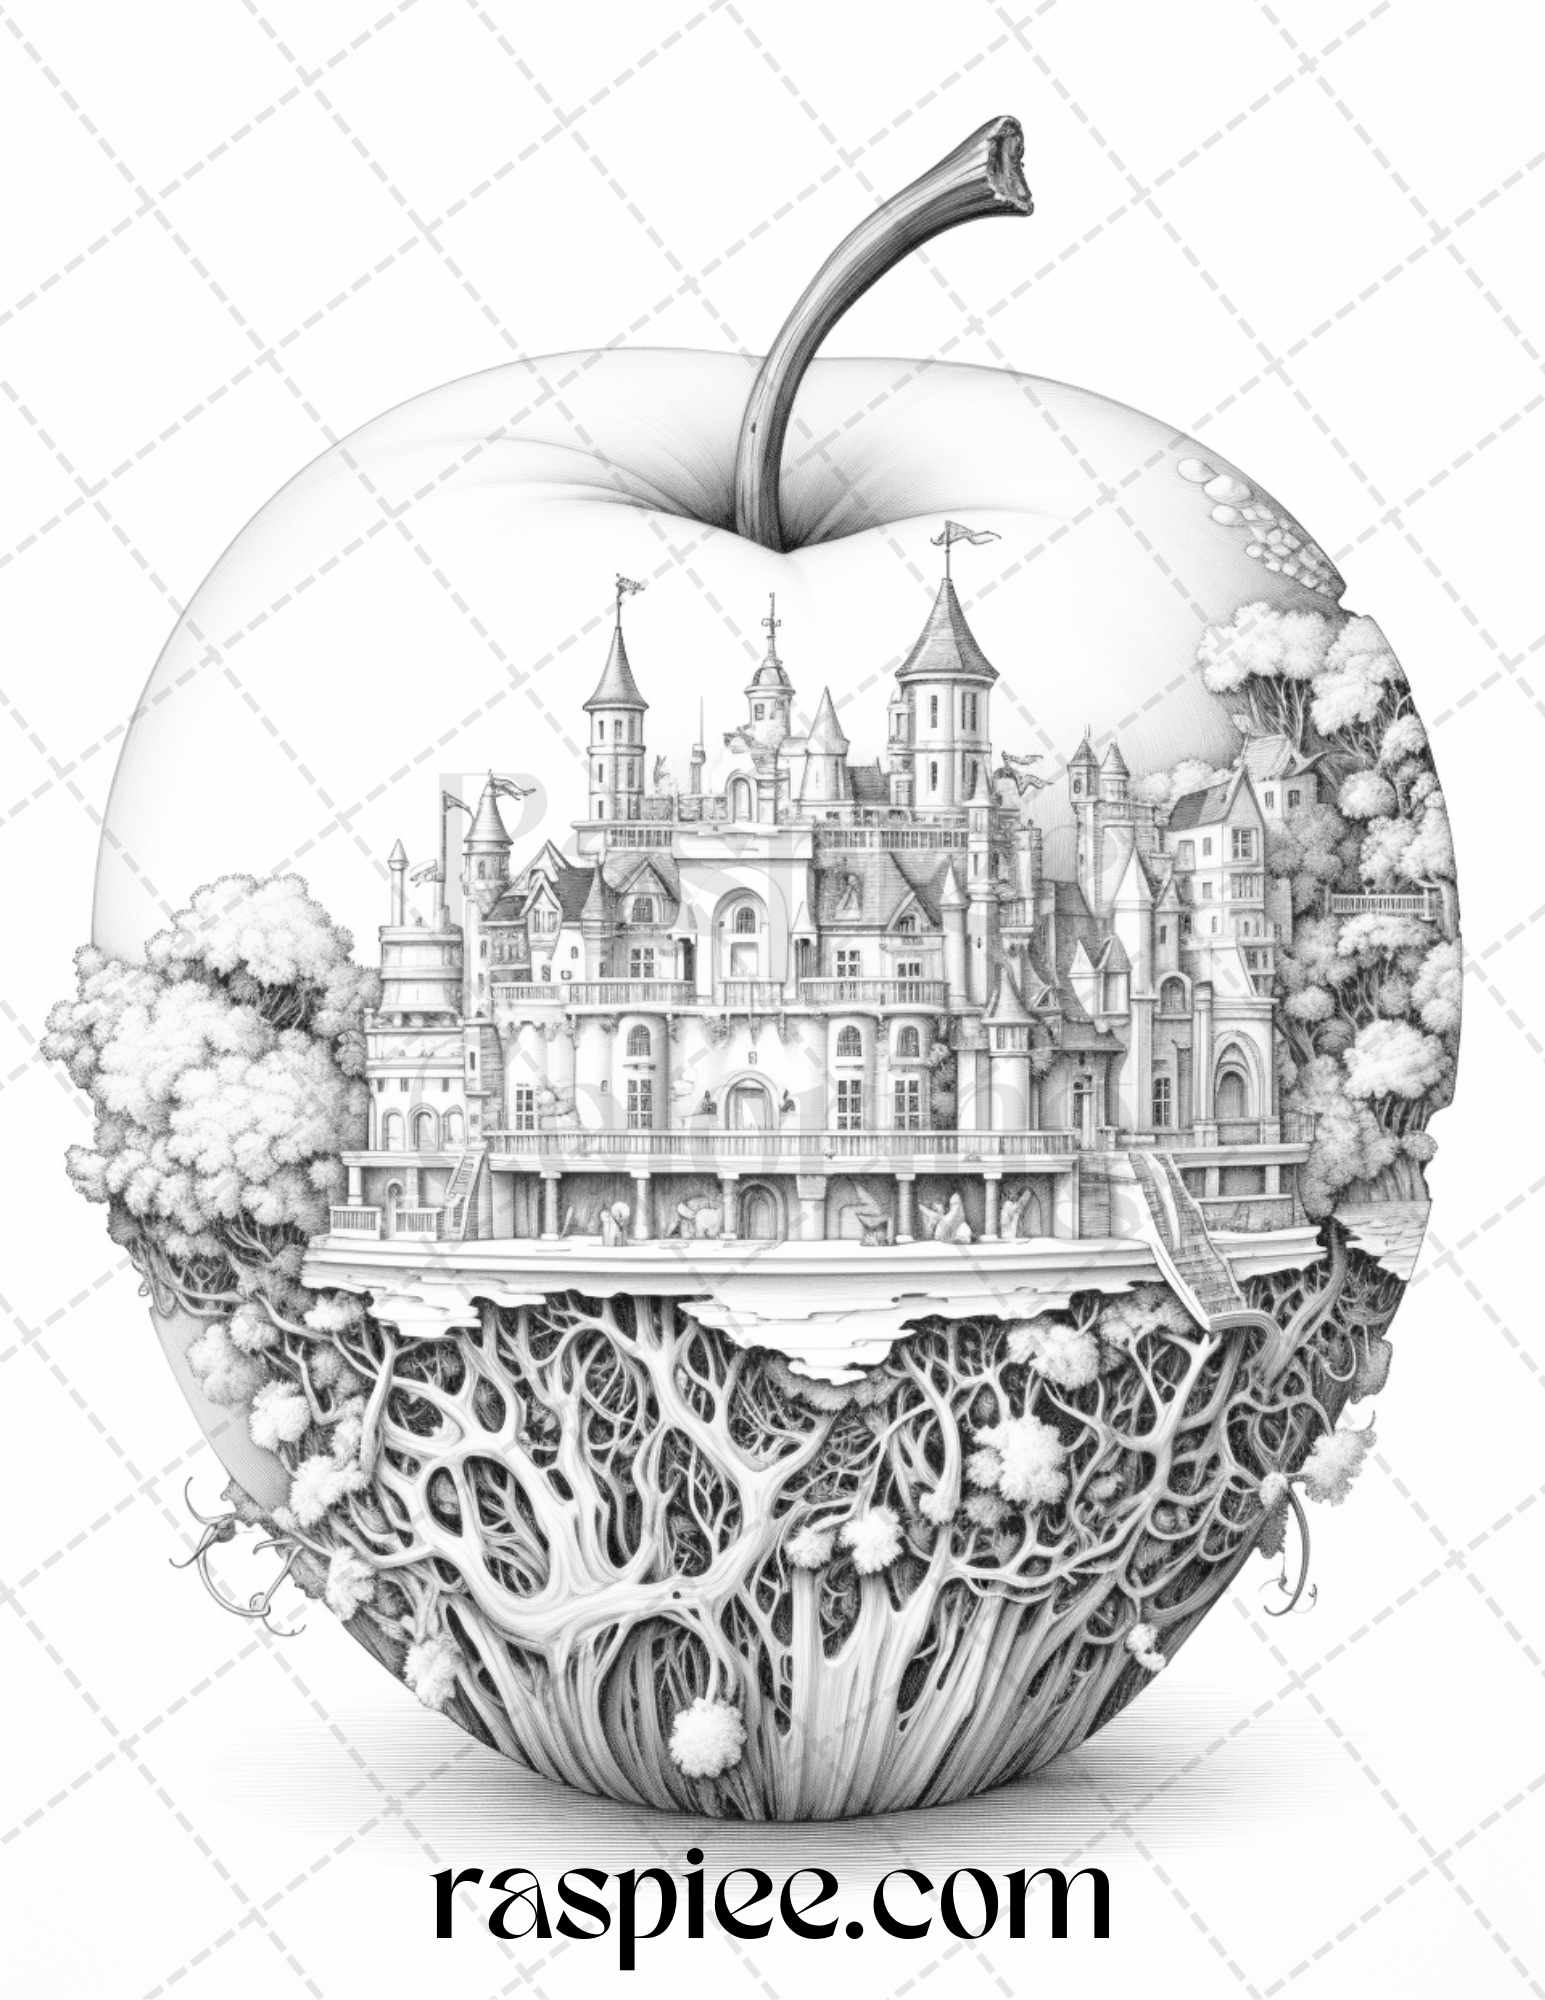 Apple Grayscale Coloring Page, Detailed Apple Coloring Sheet, Relaxing Adult Coloring Page, Stress Relieving Coloring PDF, Miniworld Landscape Coloring, Adult Coloring Stress Relief, Relaxation Coloring Activity